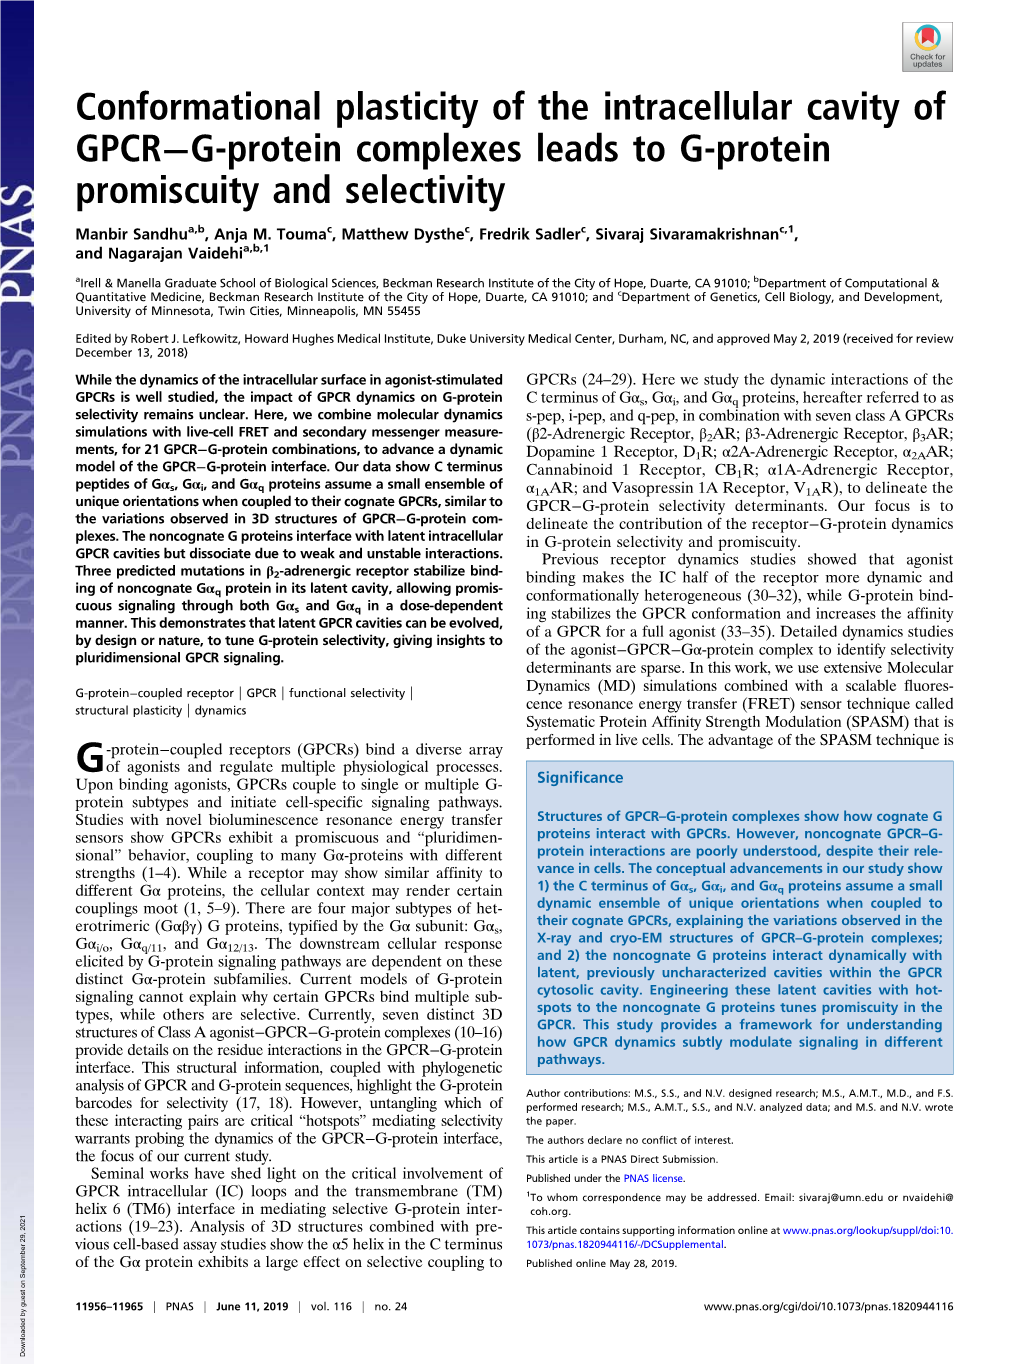 Conformational Plasticity of the Intracellular Cavity of GPCR−G-Protein Complexes Leads to G-Protein Promiscuity and Selectivity